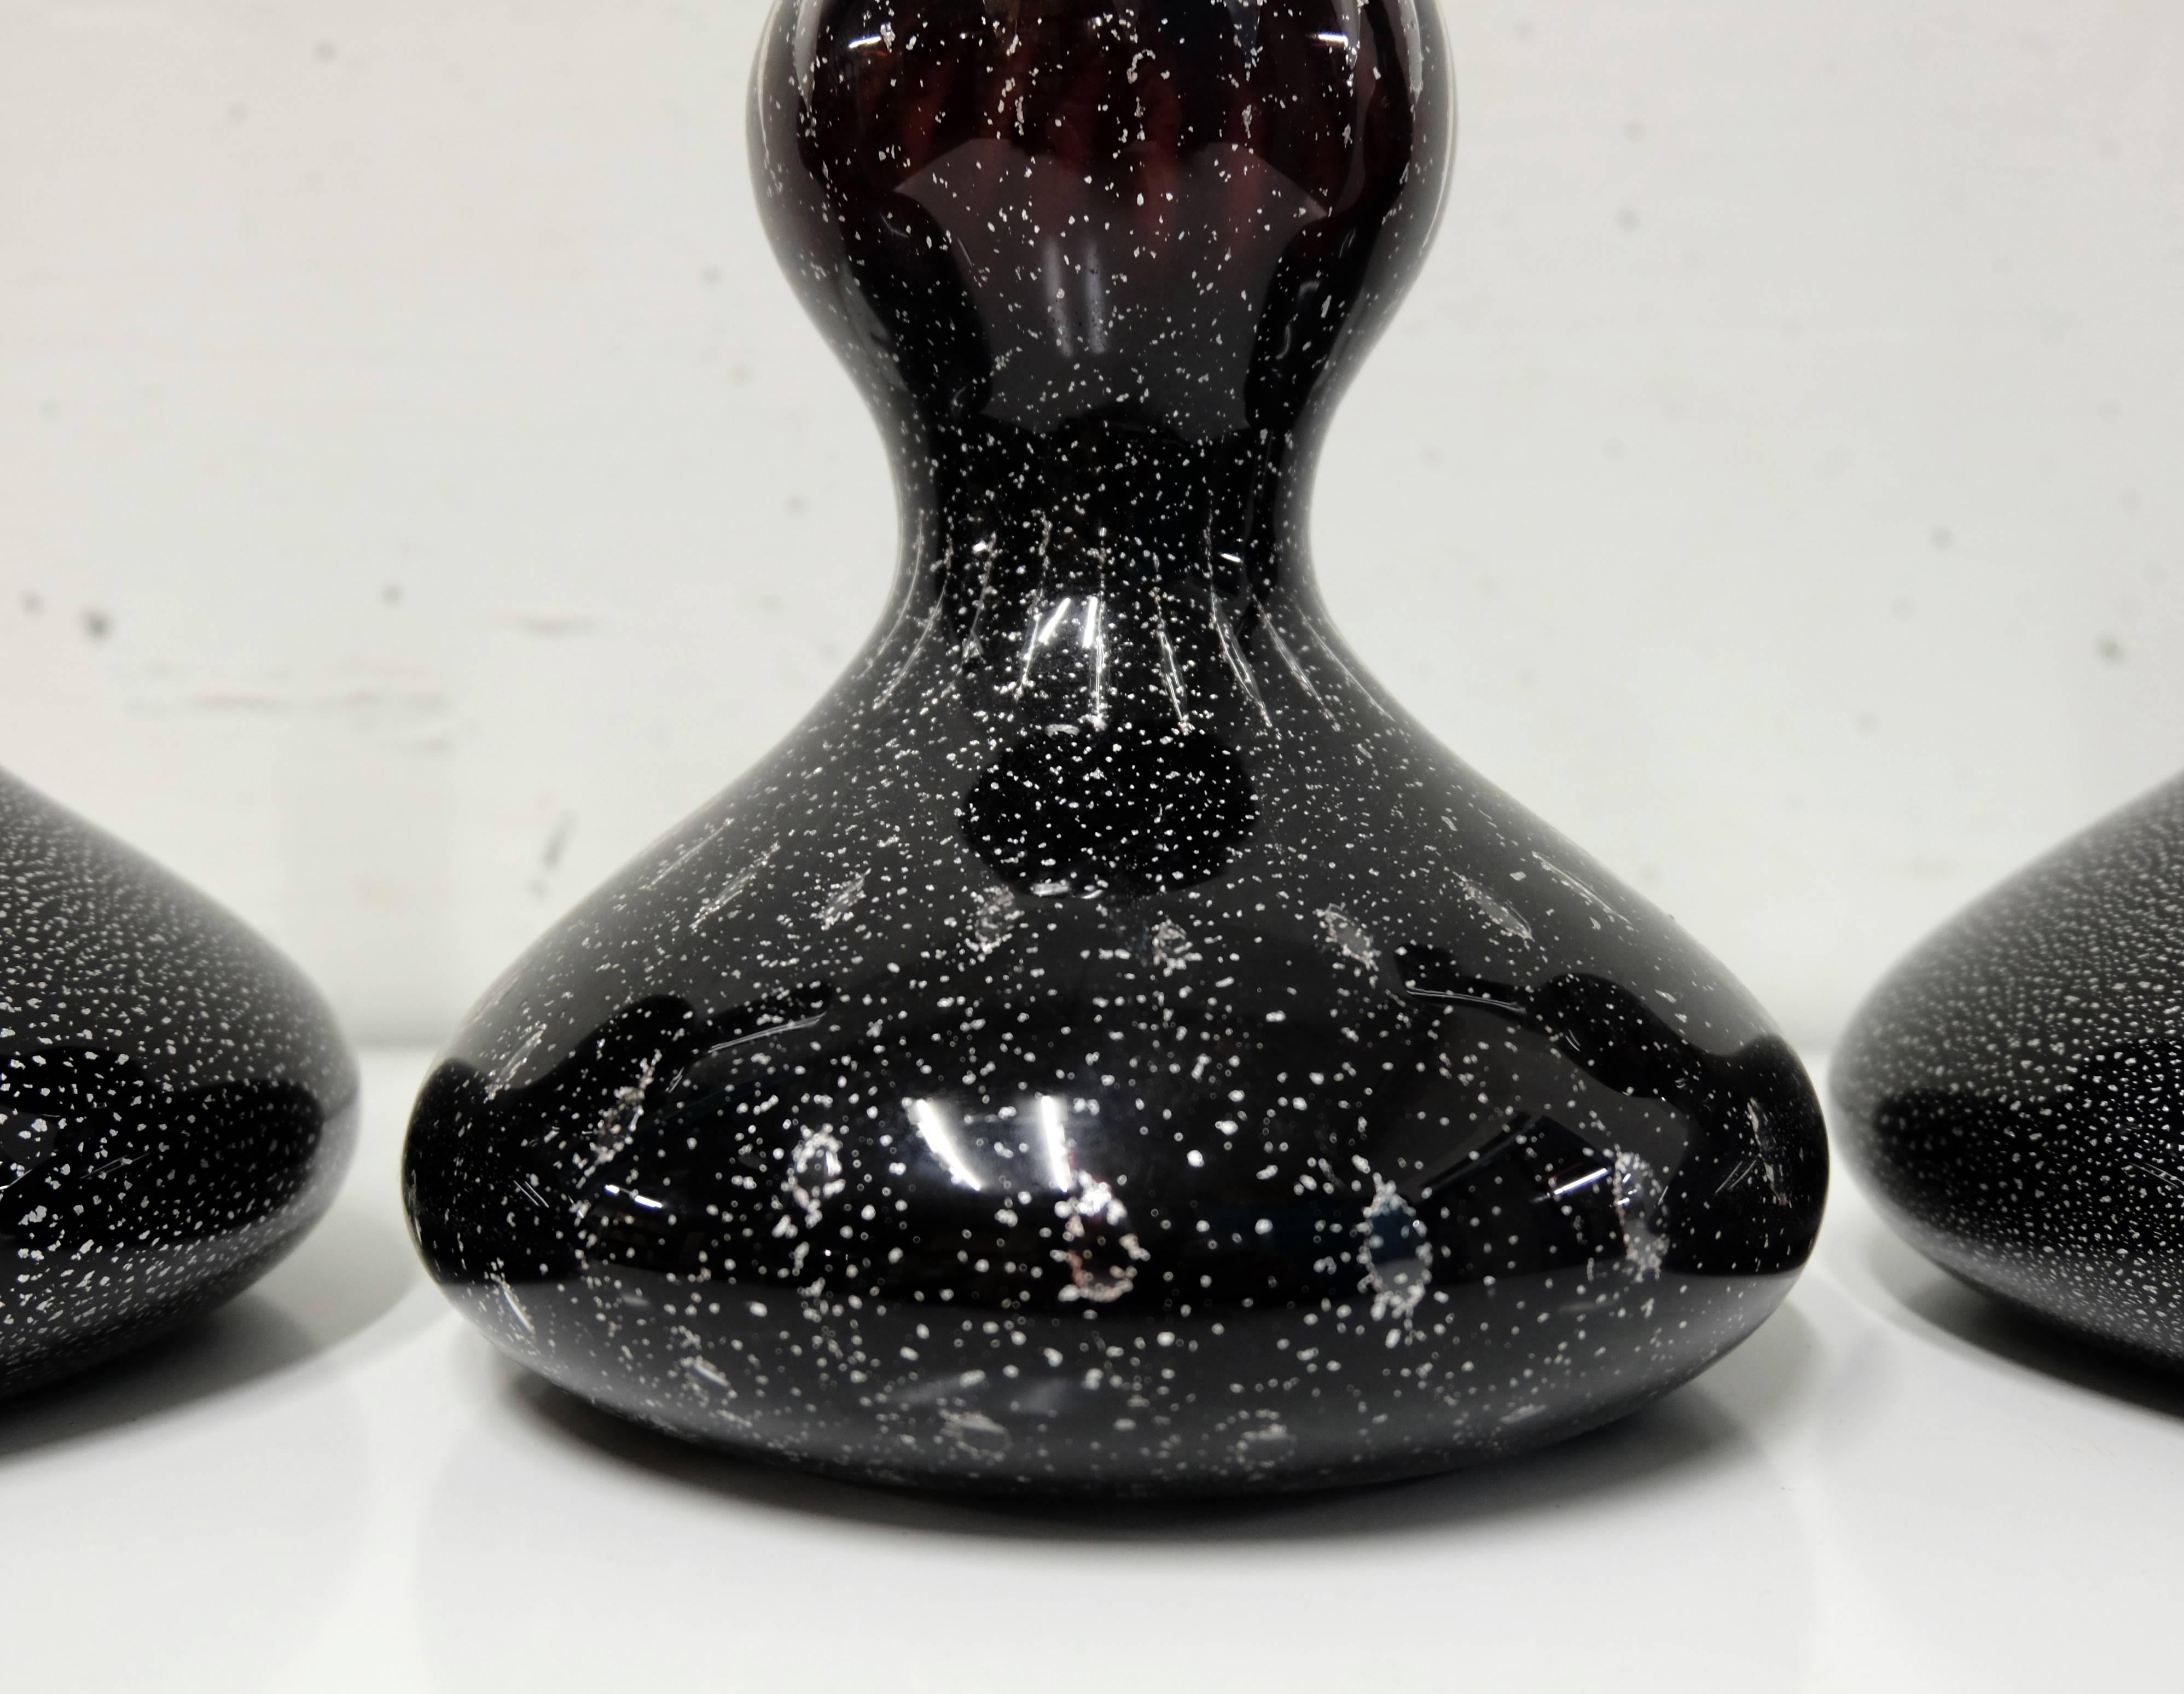 Post-Modern Murano Soliflor Vases by Christian Geissbuhler with Compania Vetraria Murano For Sale